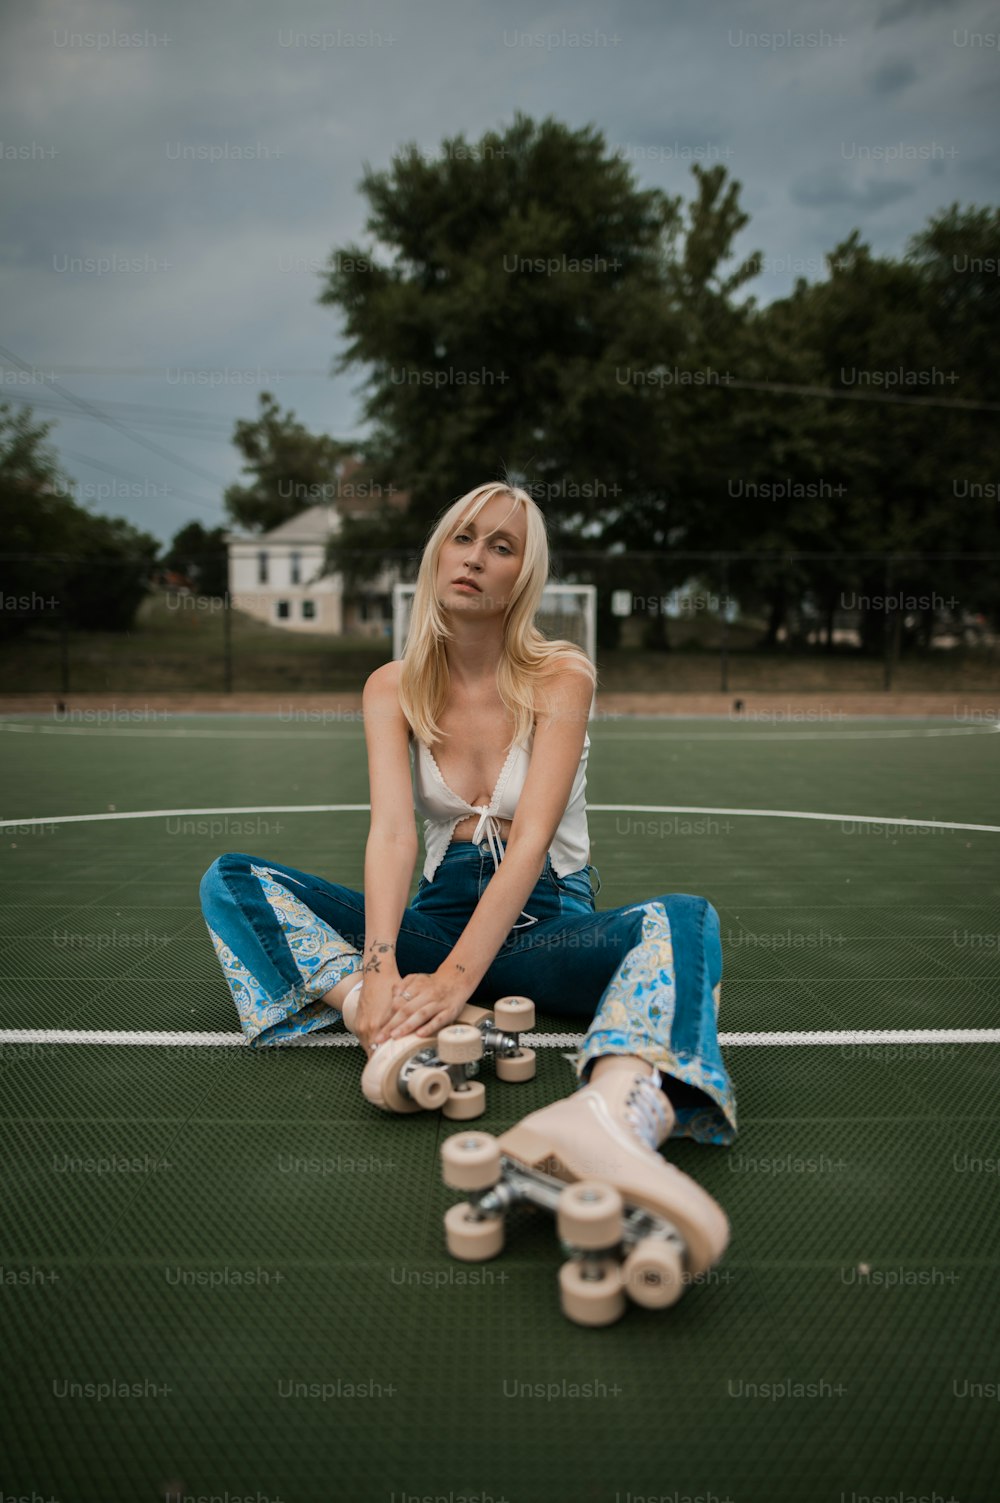 a woman sitting on a tennis court with her skateboard